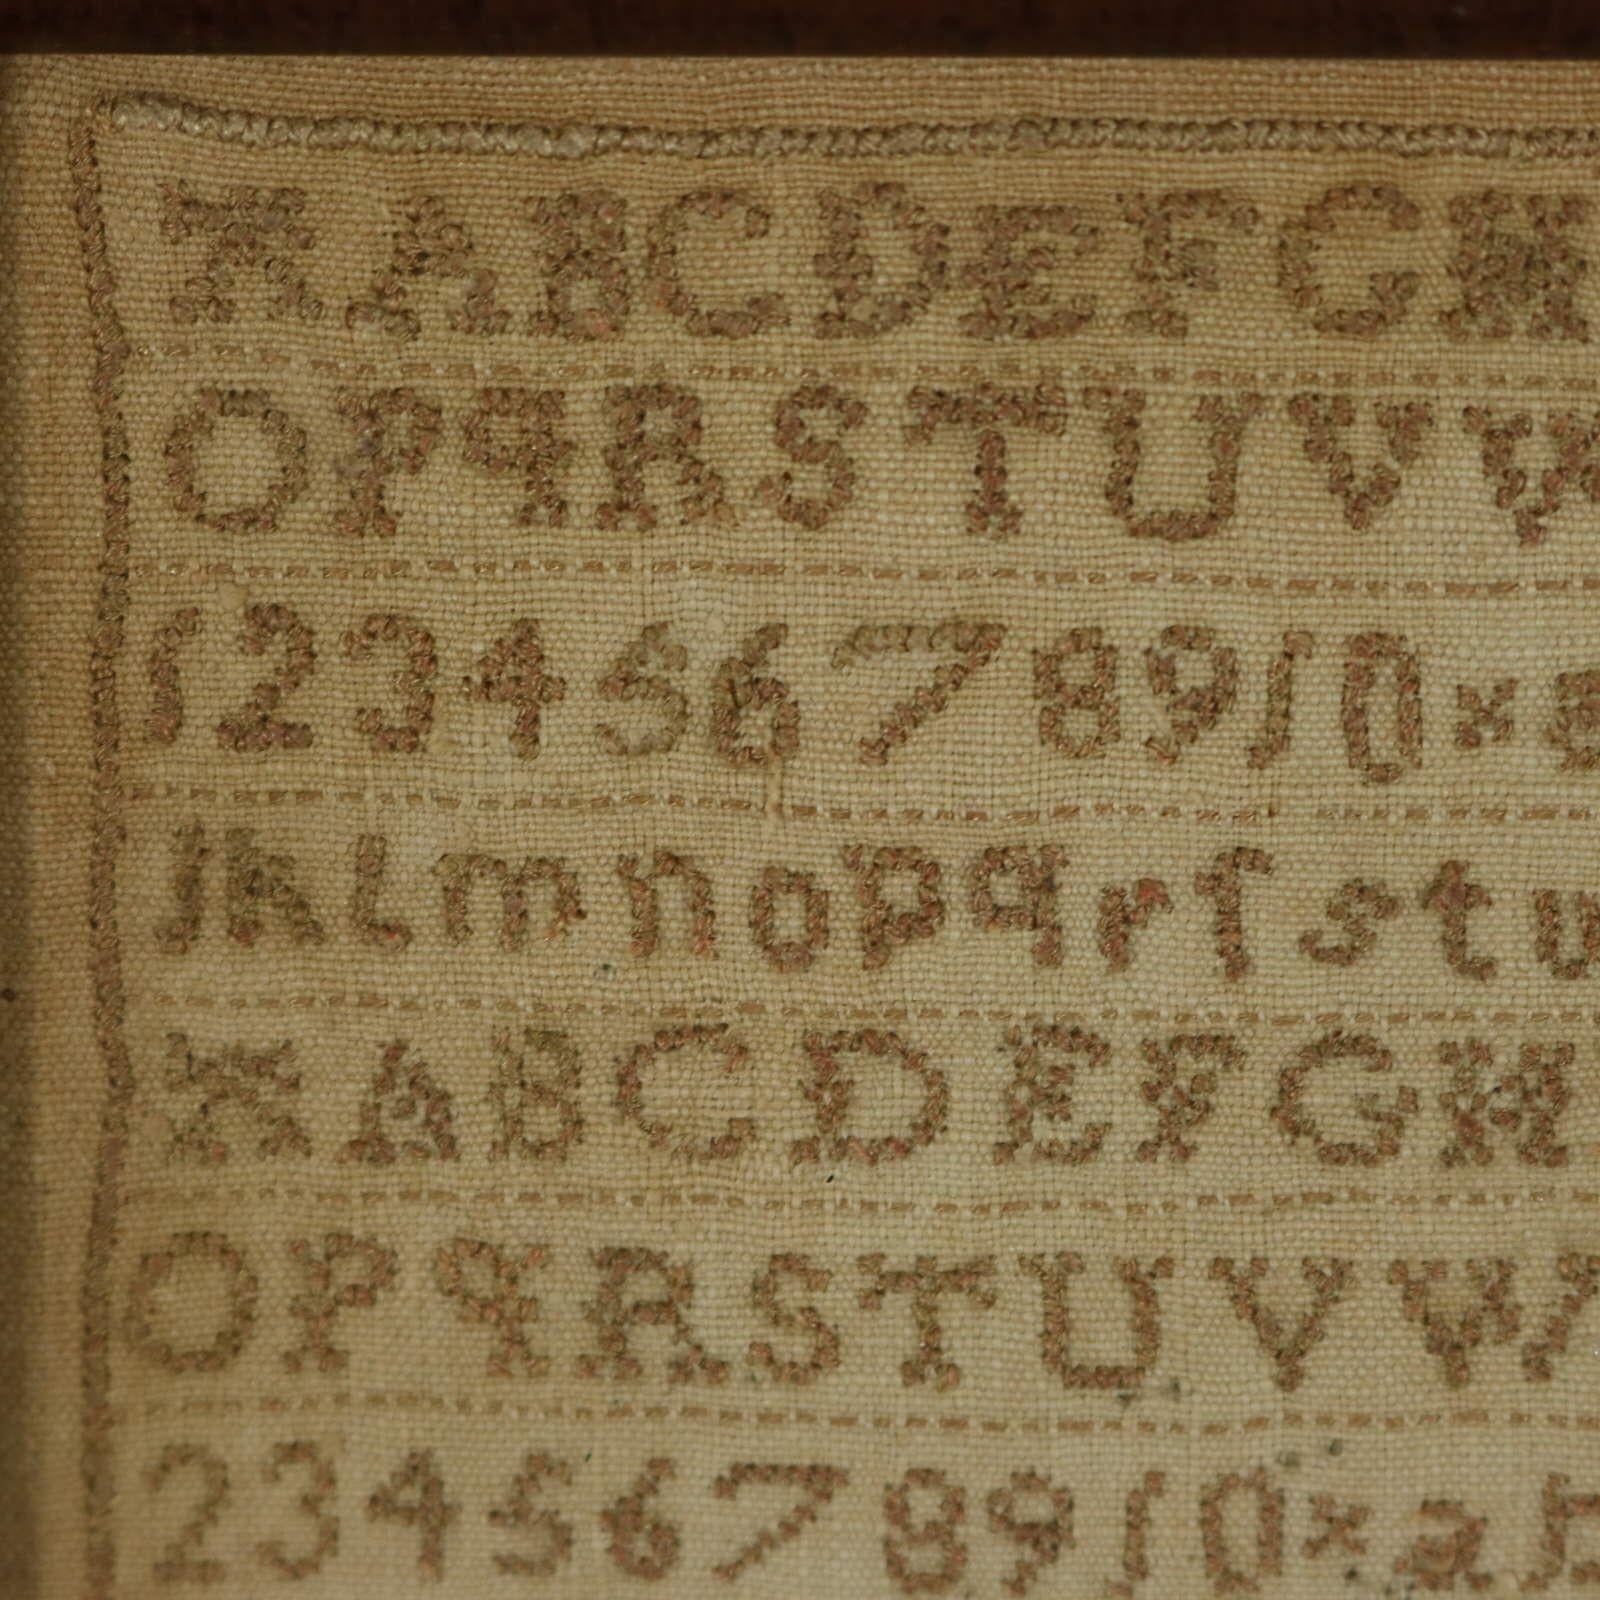 Mini Scottish Sampler, stitched in 1821, by Margaret Gibson aged 10. The sampler is worked in a brown cotton-like thread on a linen ground, mainly in cross stitch. Simple line border. Alphabets A-Z in upper case and lower case and numbers 1-10.